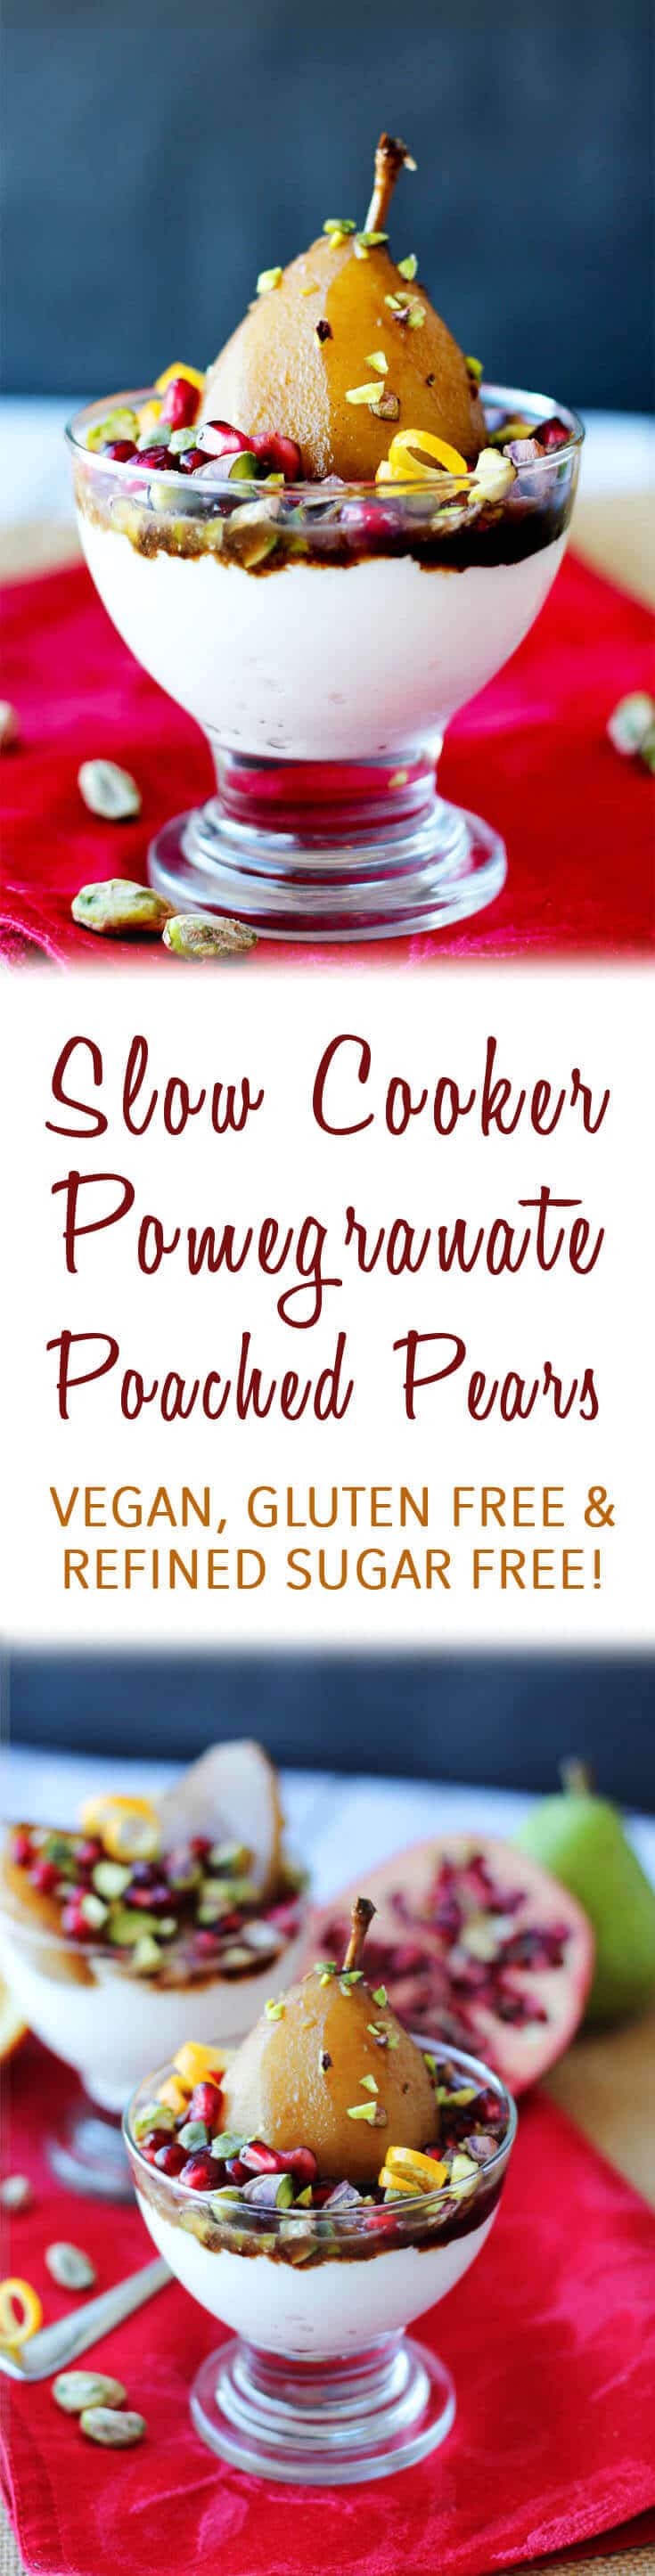 A pinterest photo of a poached pear in yogurt with the overlay text \"Slow Cooker Pomegranate Poached Pears. Vegan, Gluten Free & Refined Sugar Free!\"